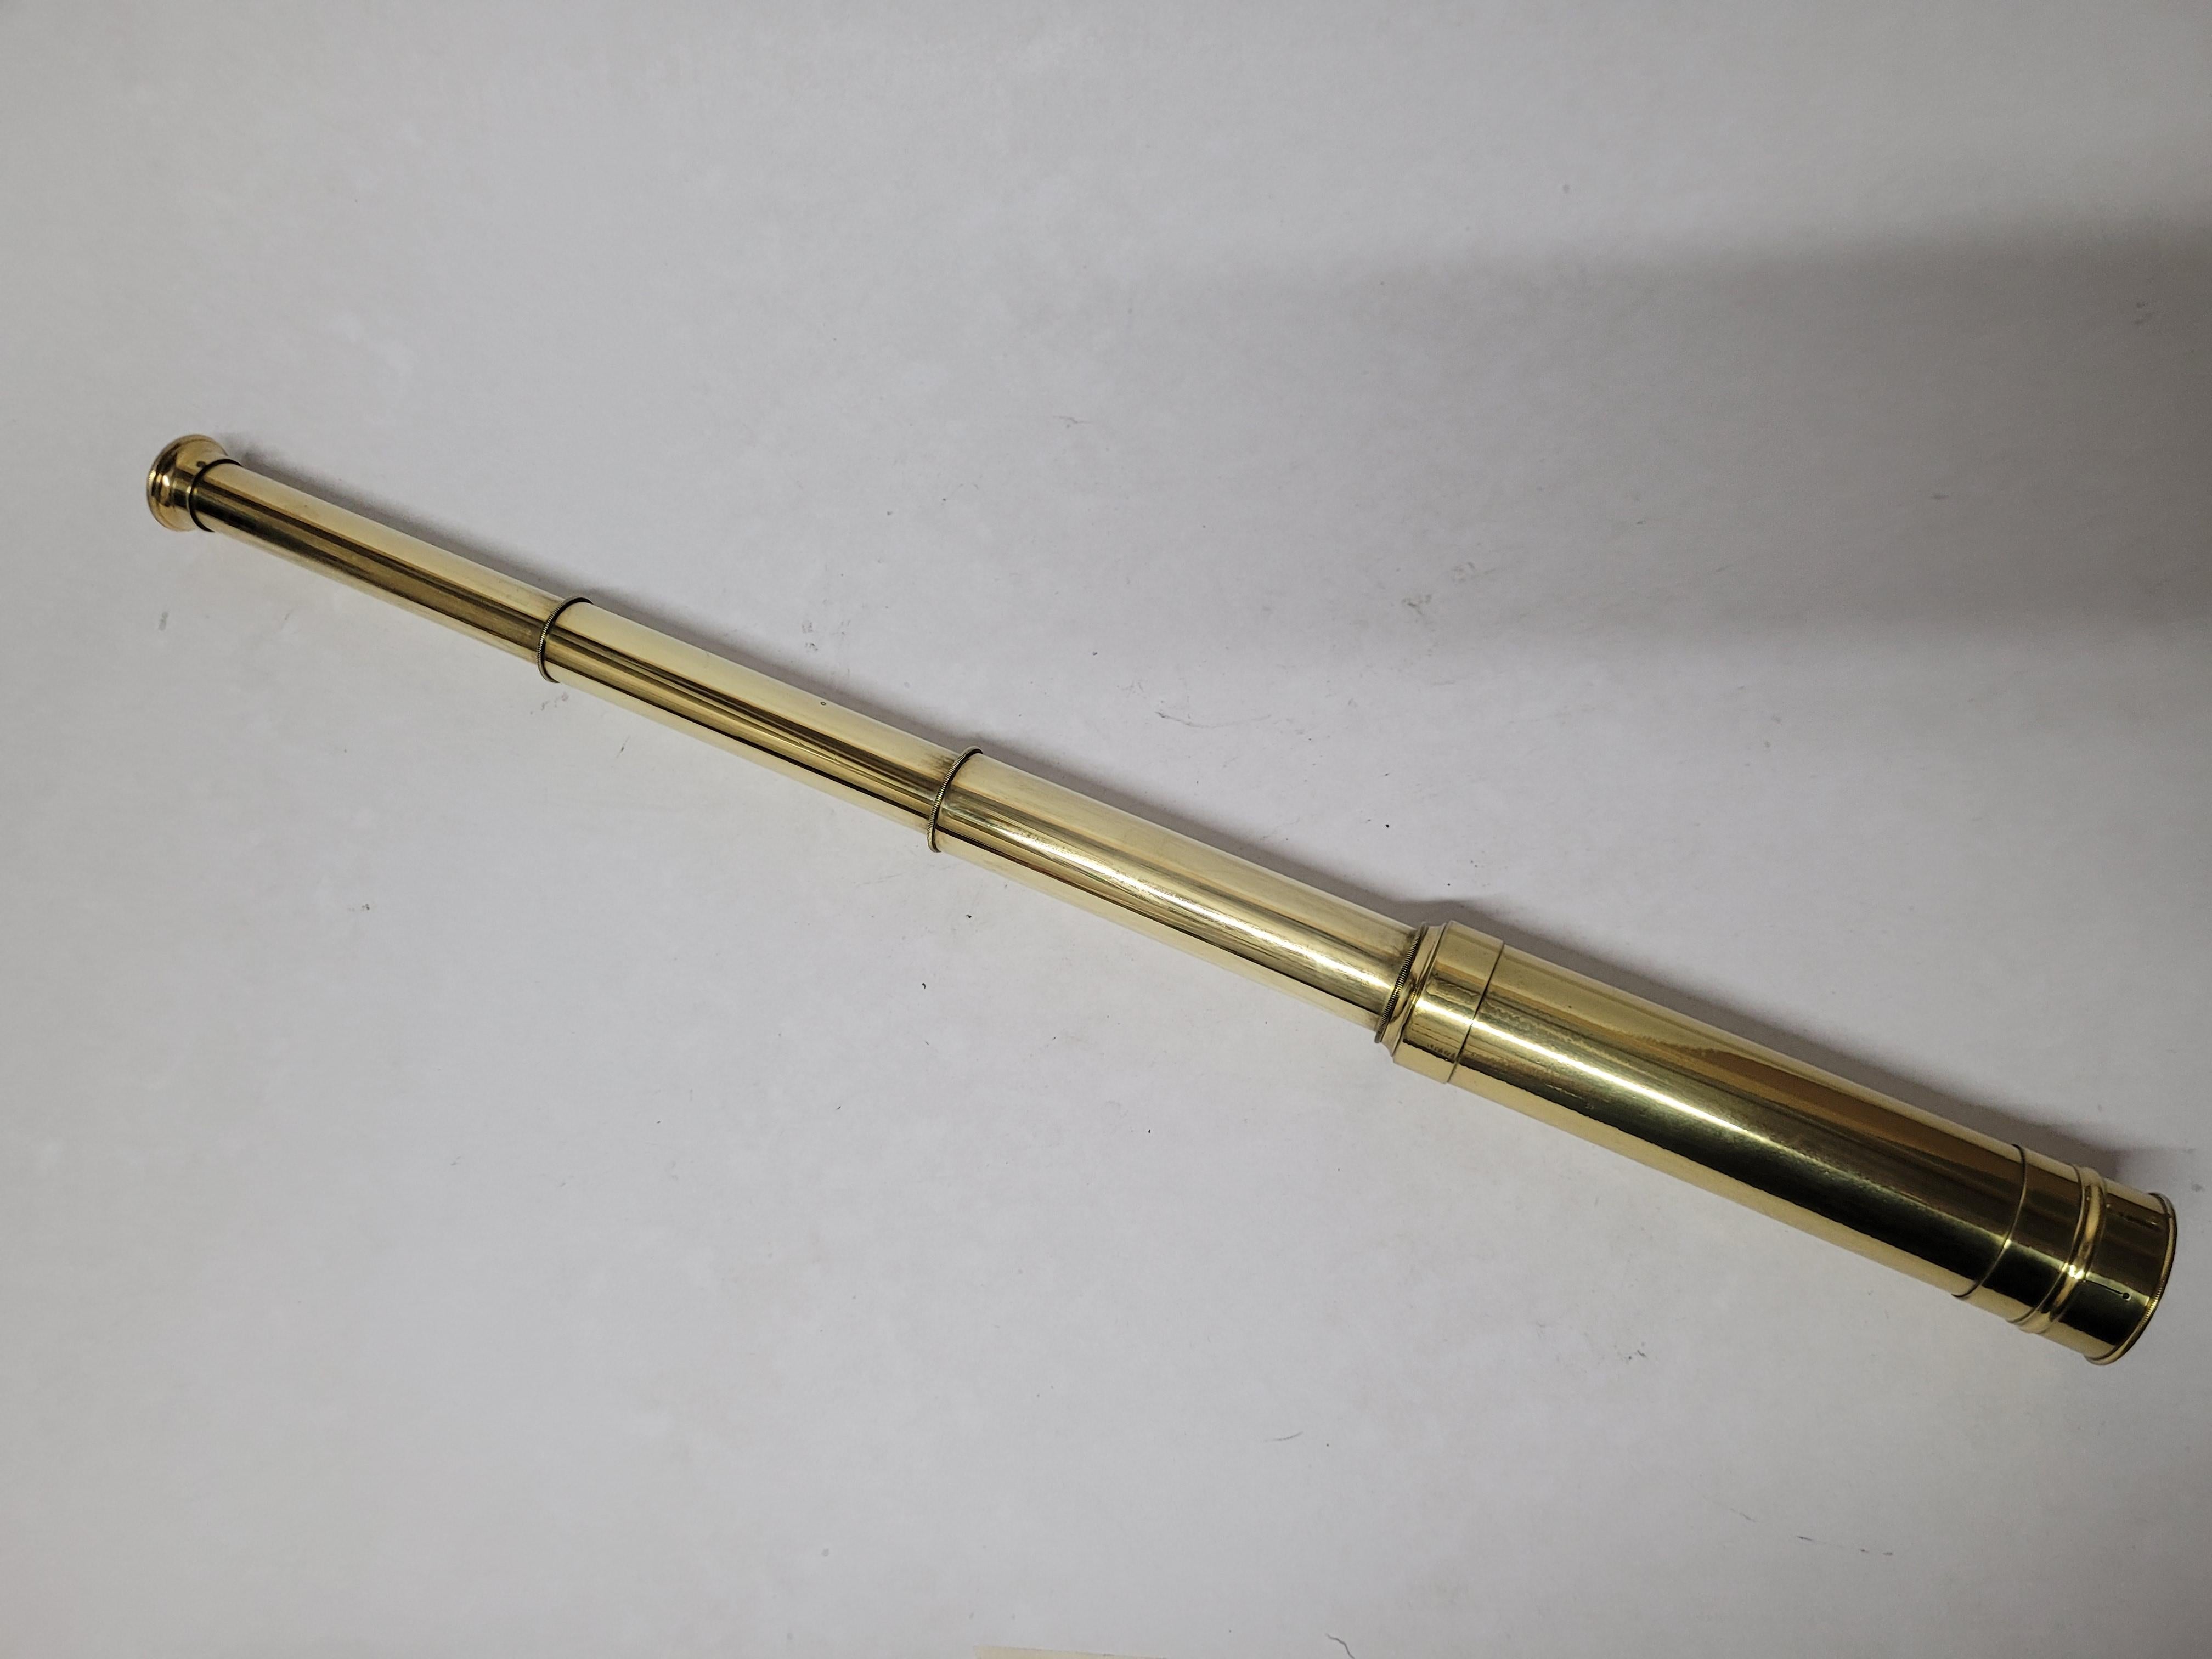 Ships spyglass telescope appropriate for use on a yacht, ship, or anywhere with a view. Nice smaller size. This has been meticulously polished and lacquered. We just restored a great collection of these. This fine instrument has a triple draw barrel